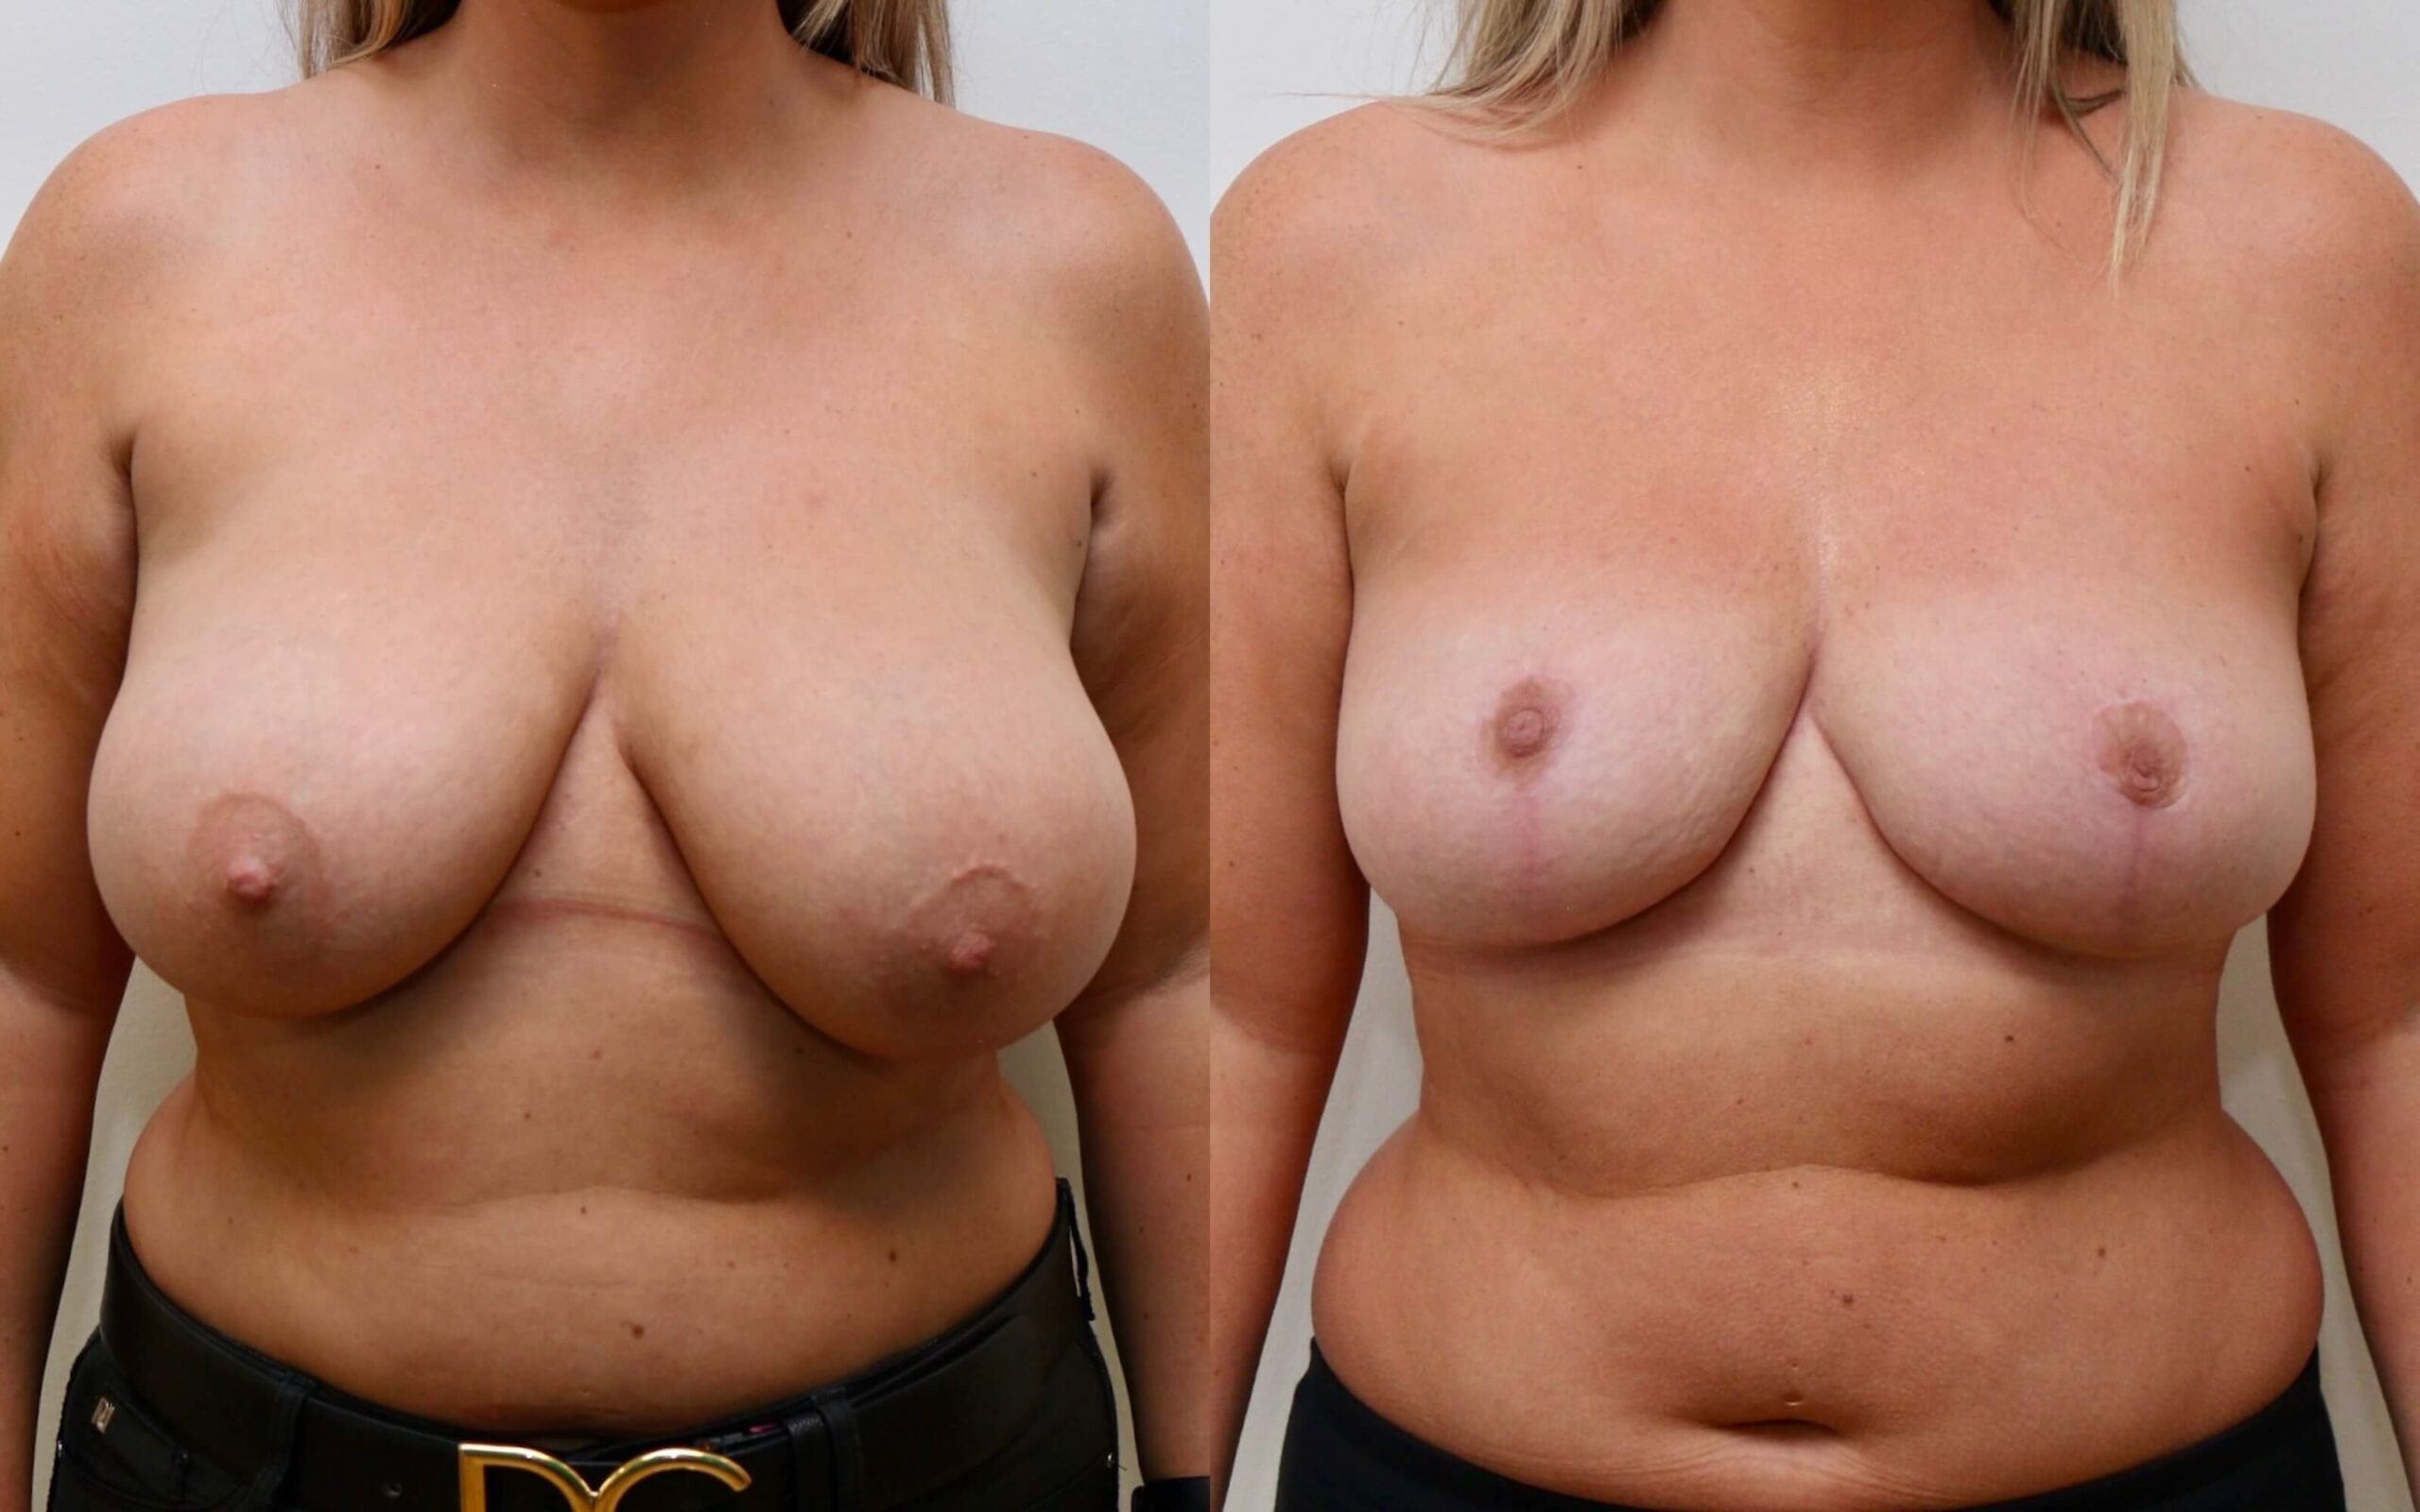 Breast uplift and correction of asymmetry